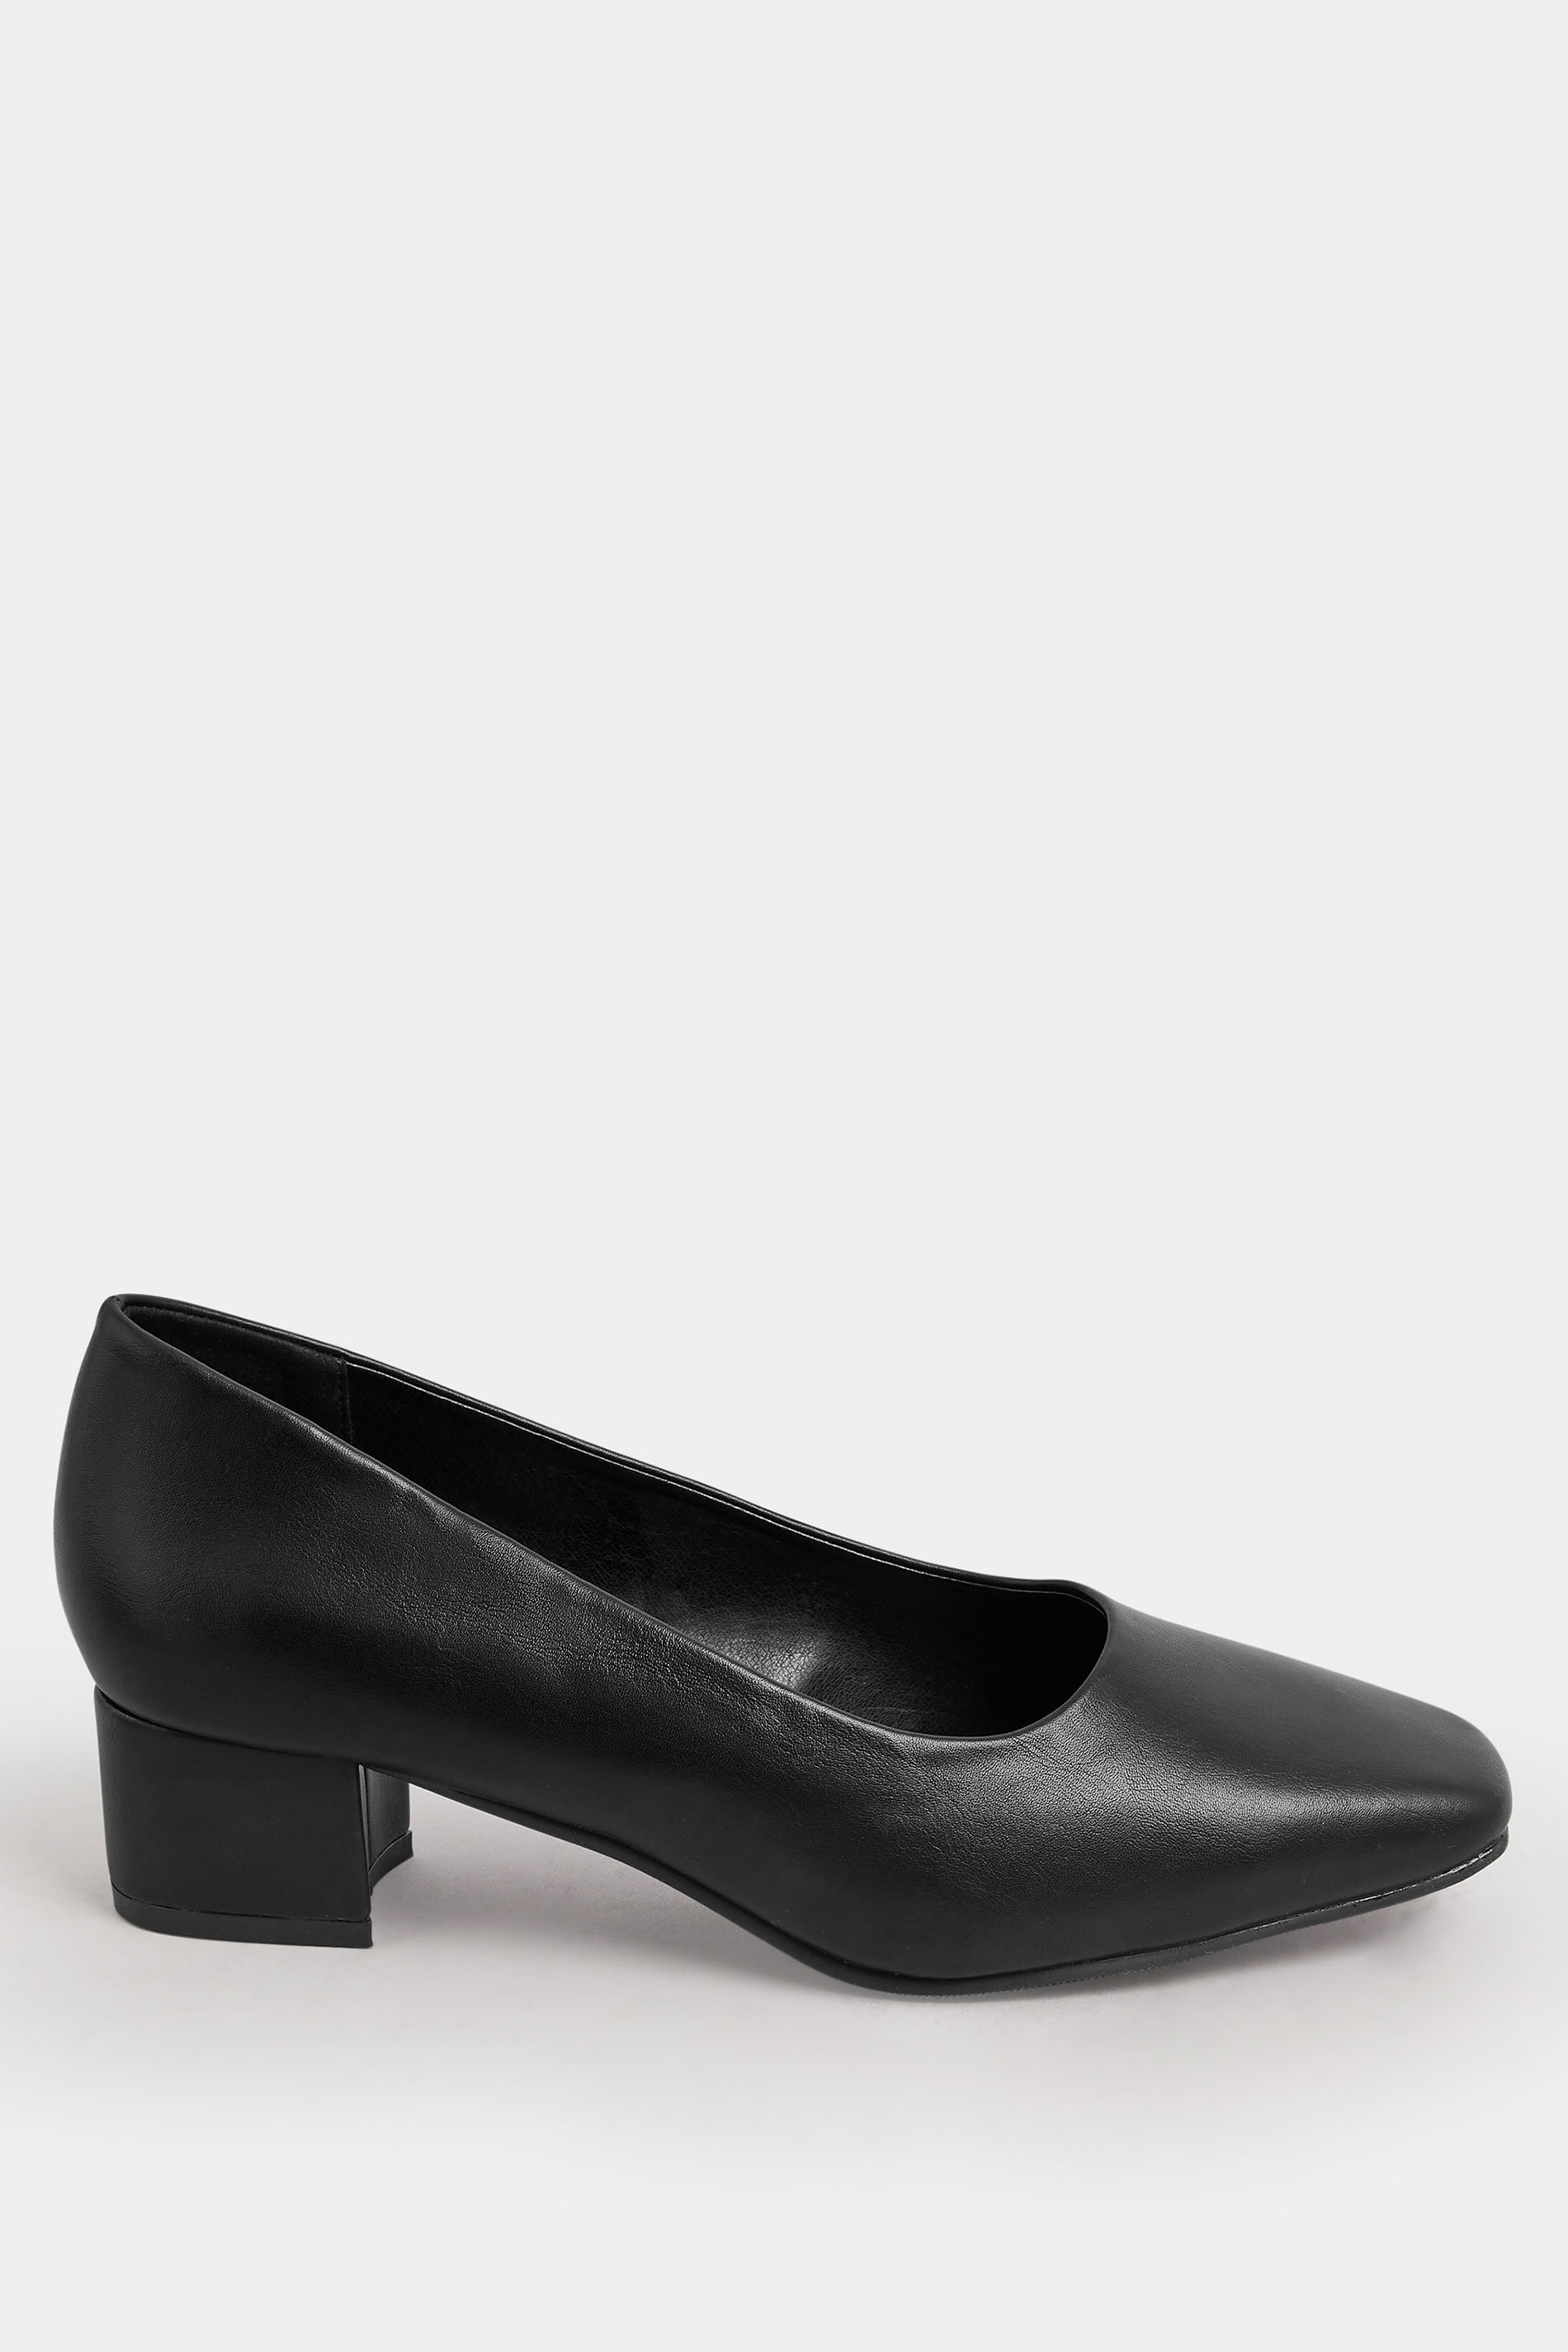 Black Faux Leather Block Heel Court Shoes In Extra Wide EEE Fit | Yours Clothing 3